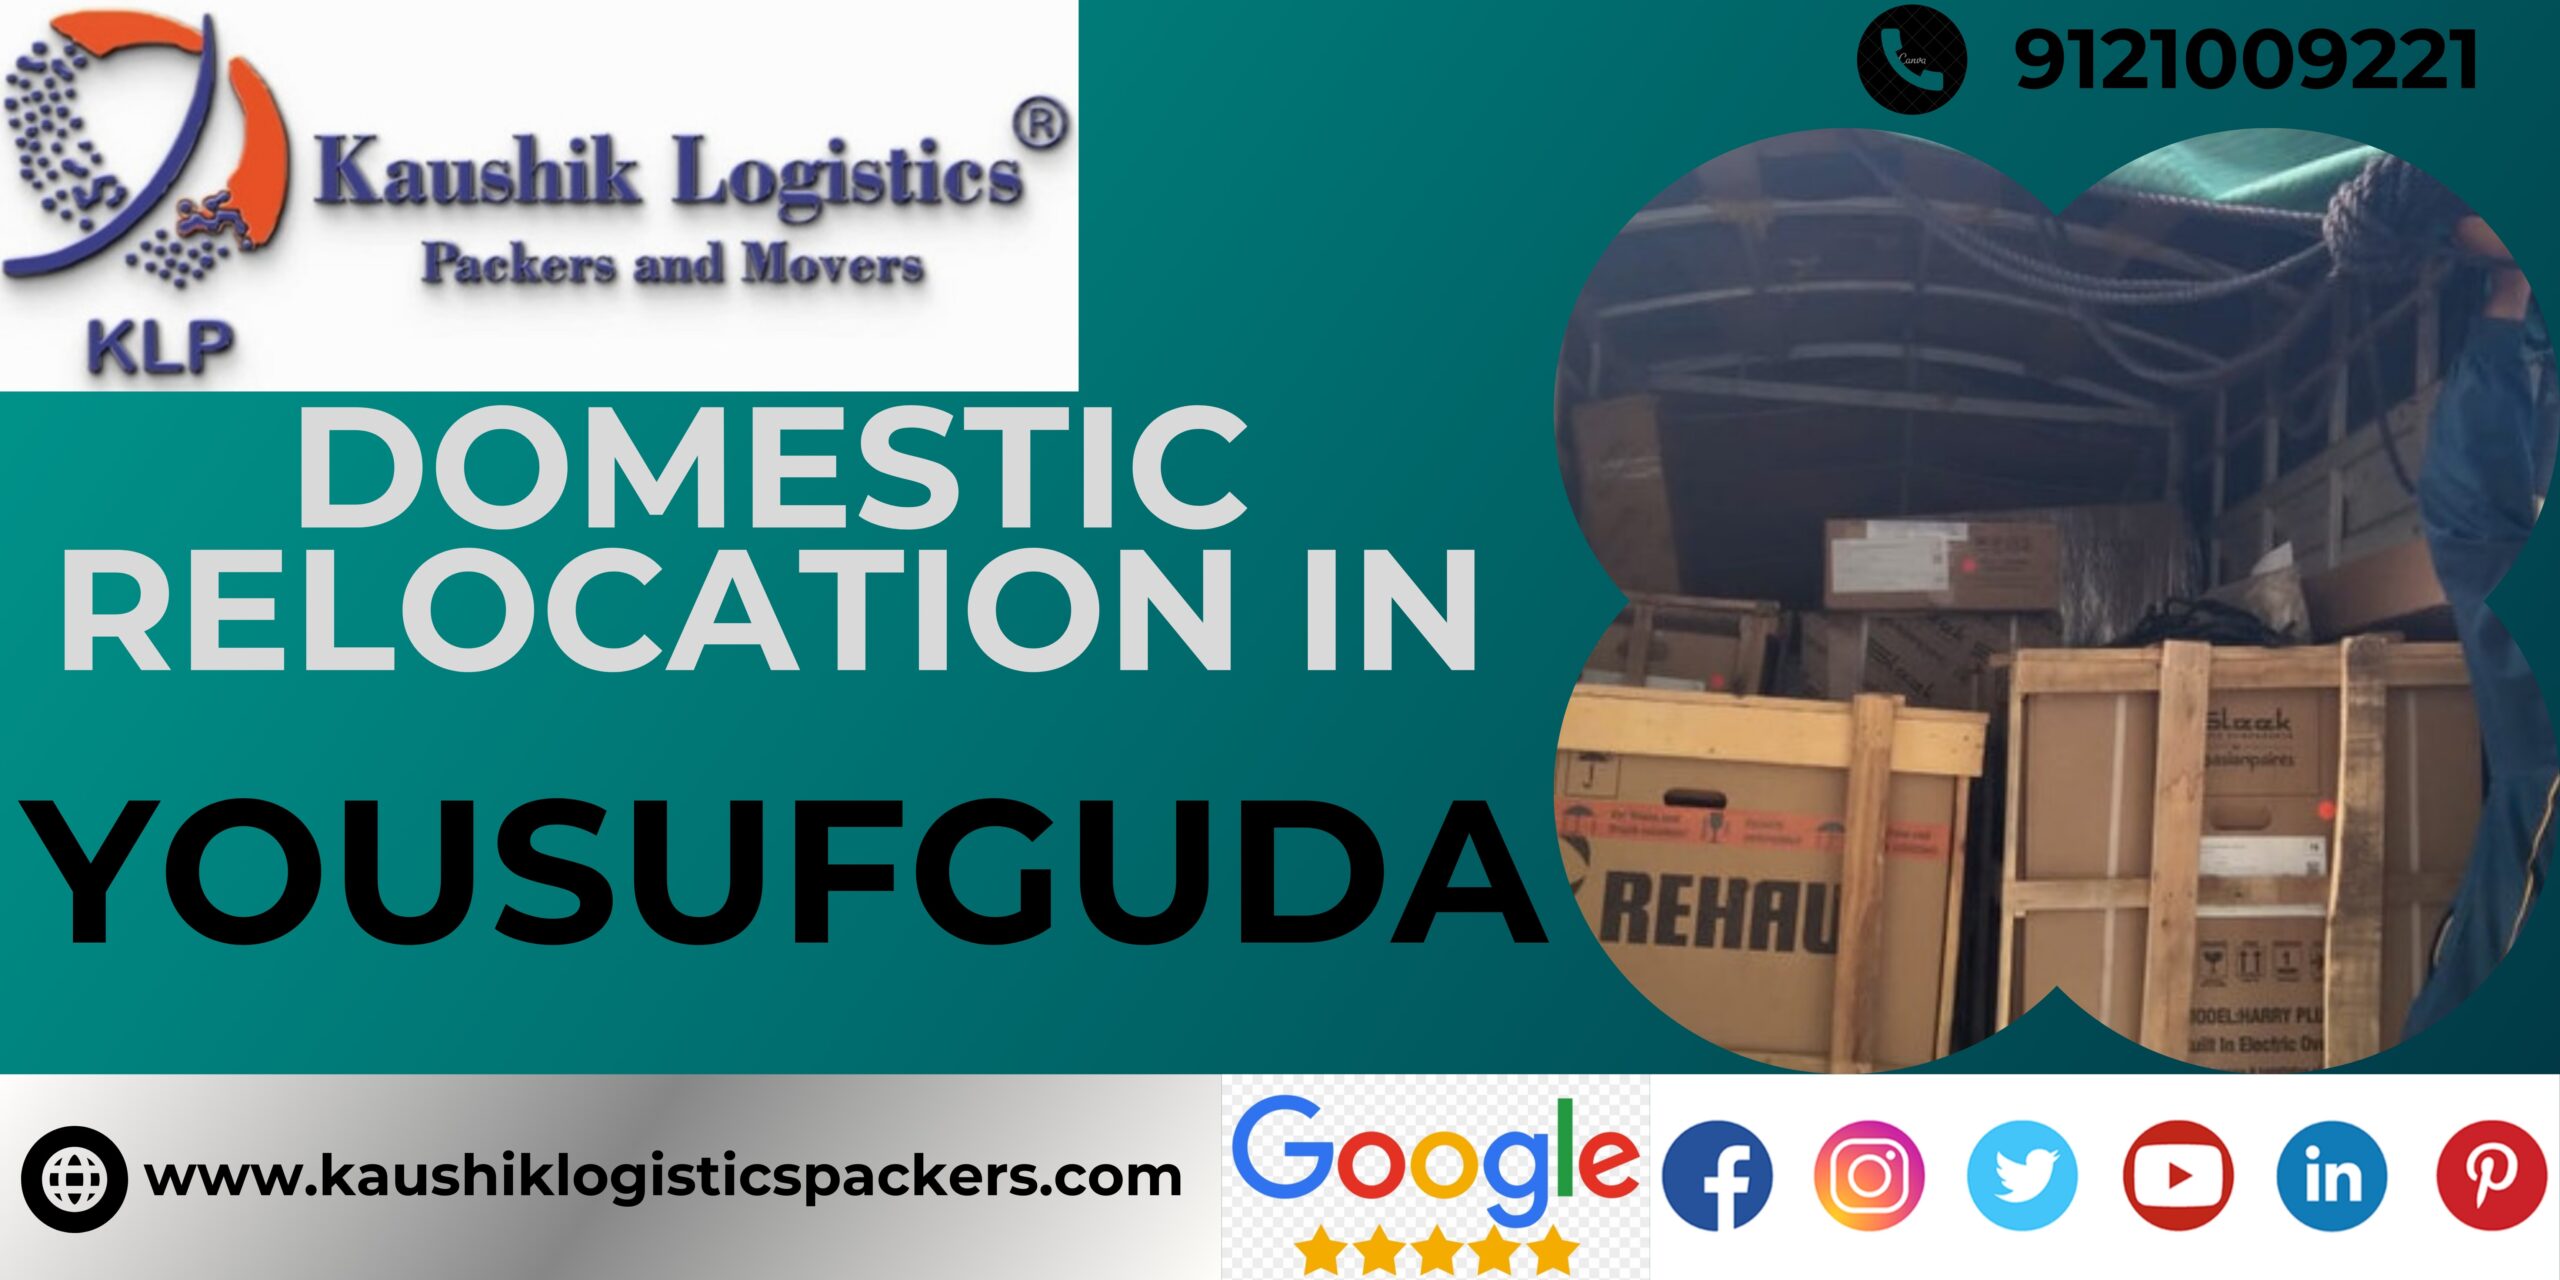 Packers and Movers In Yousufguda